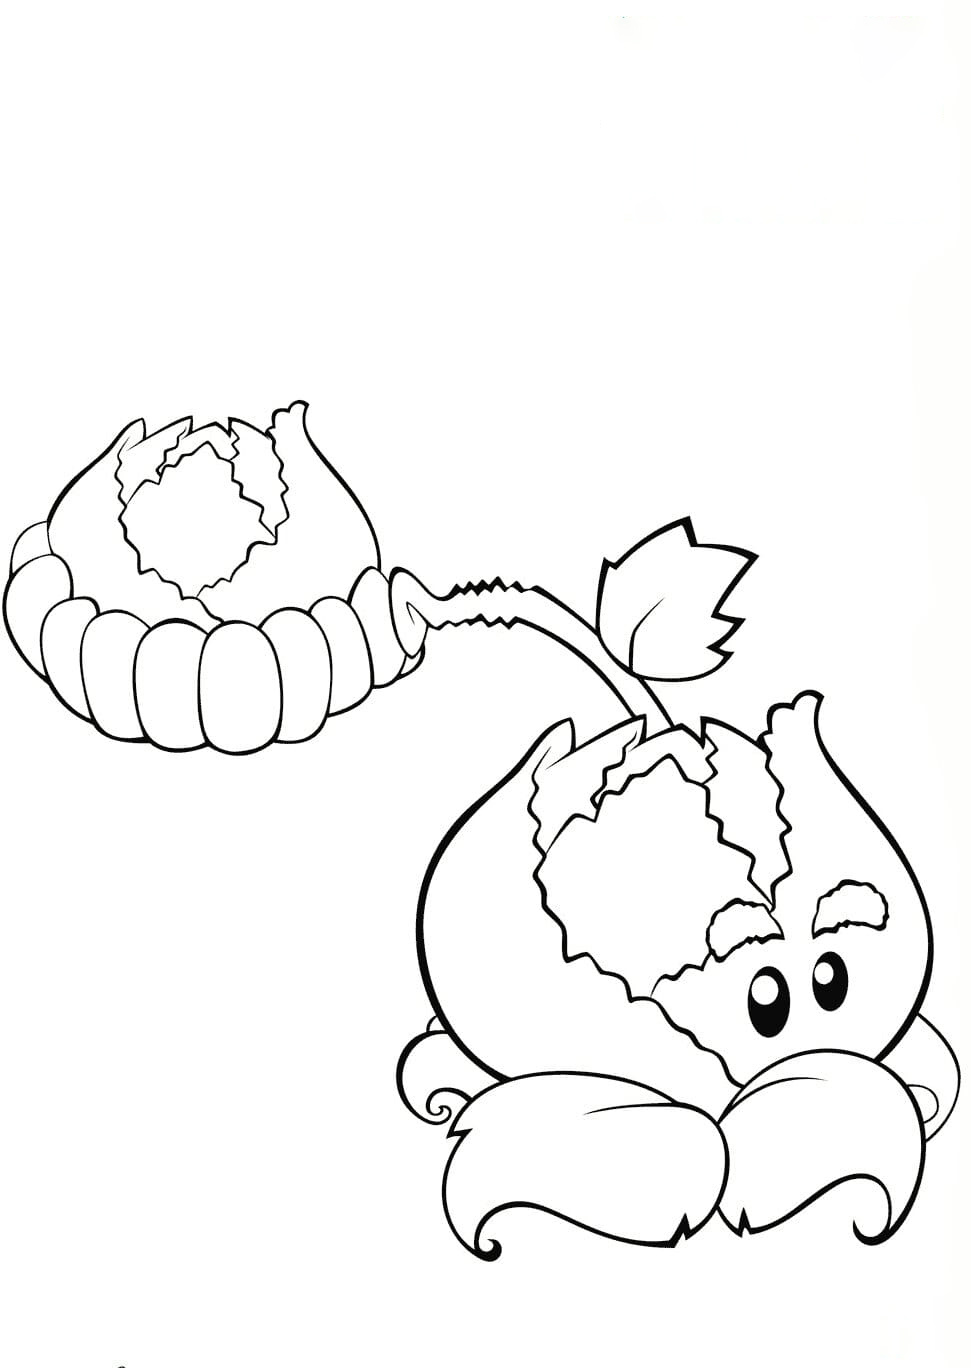 Cabbage-pult Coloring Pages